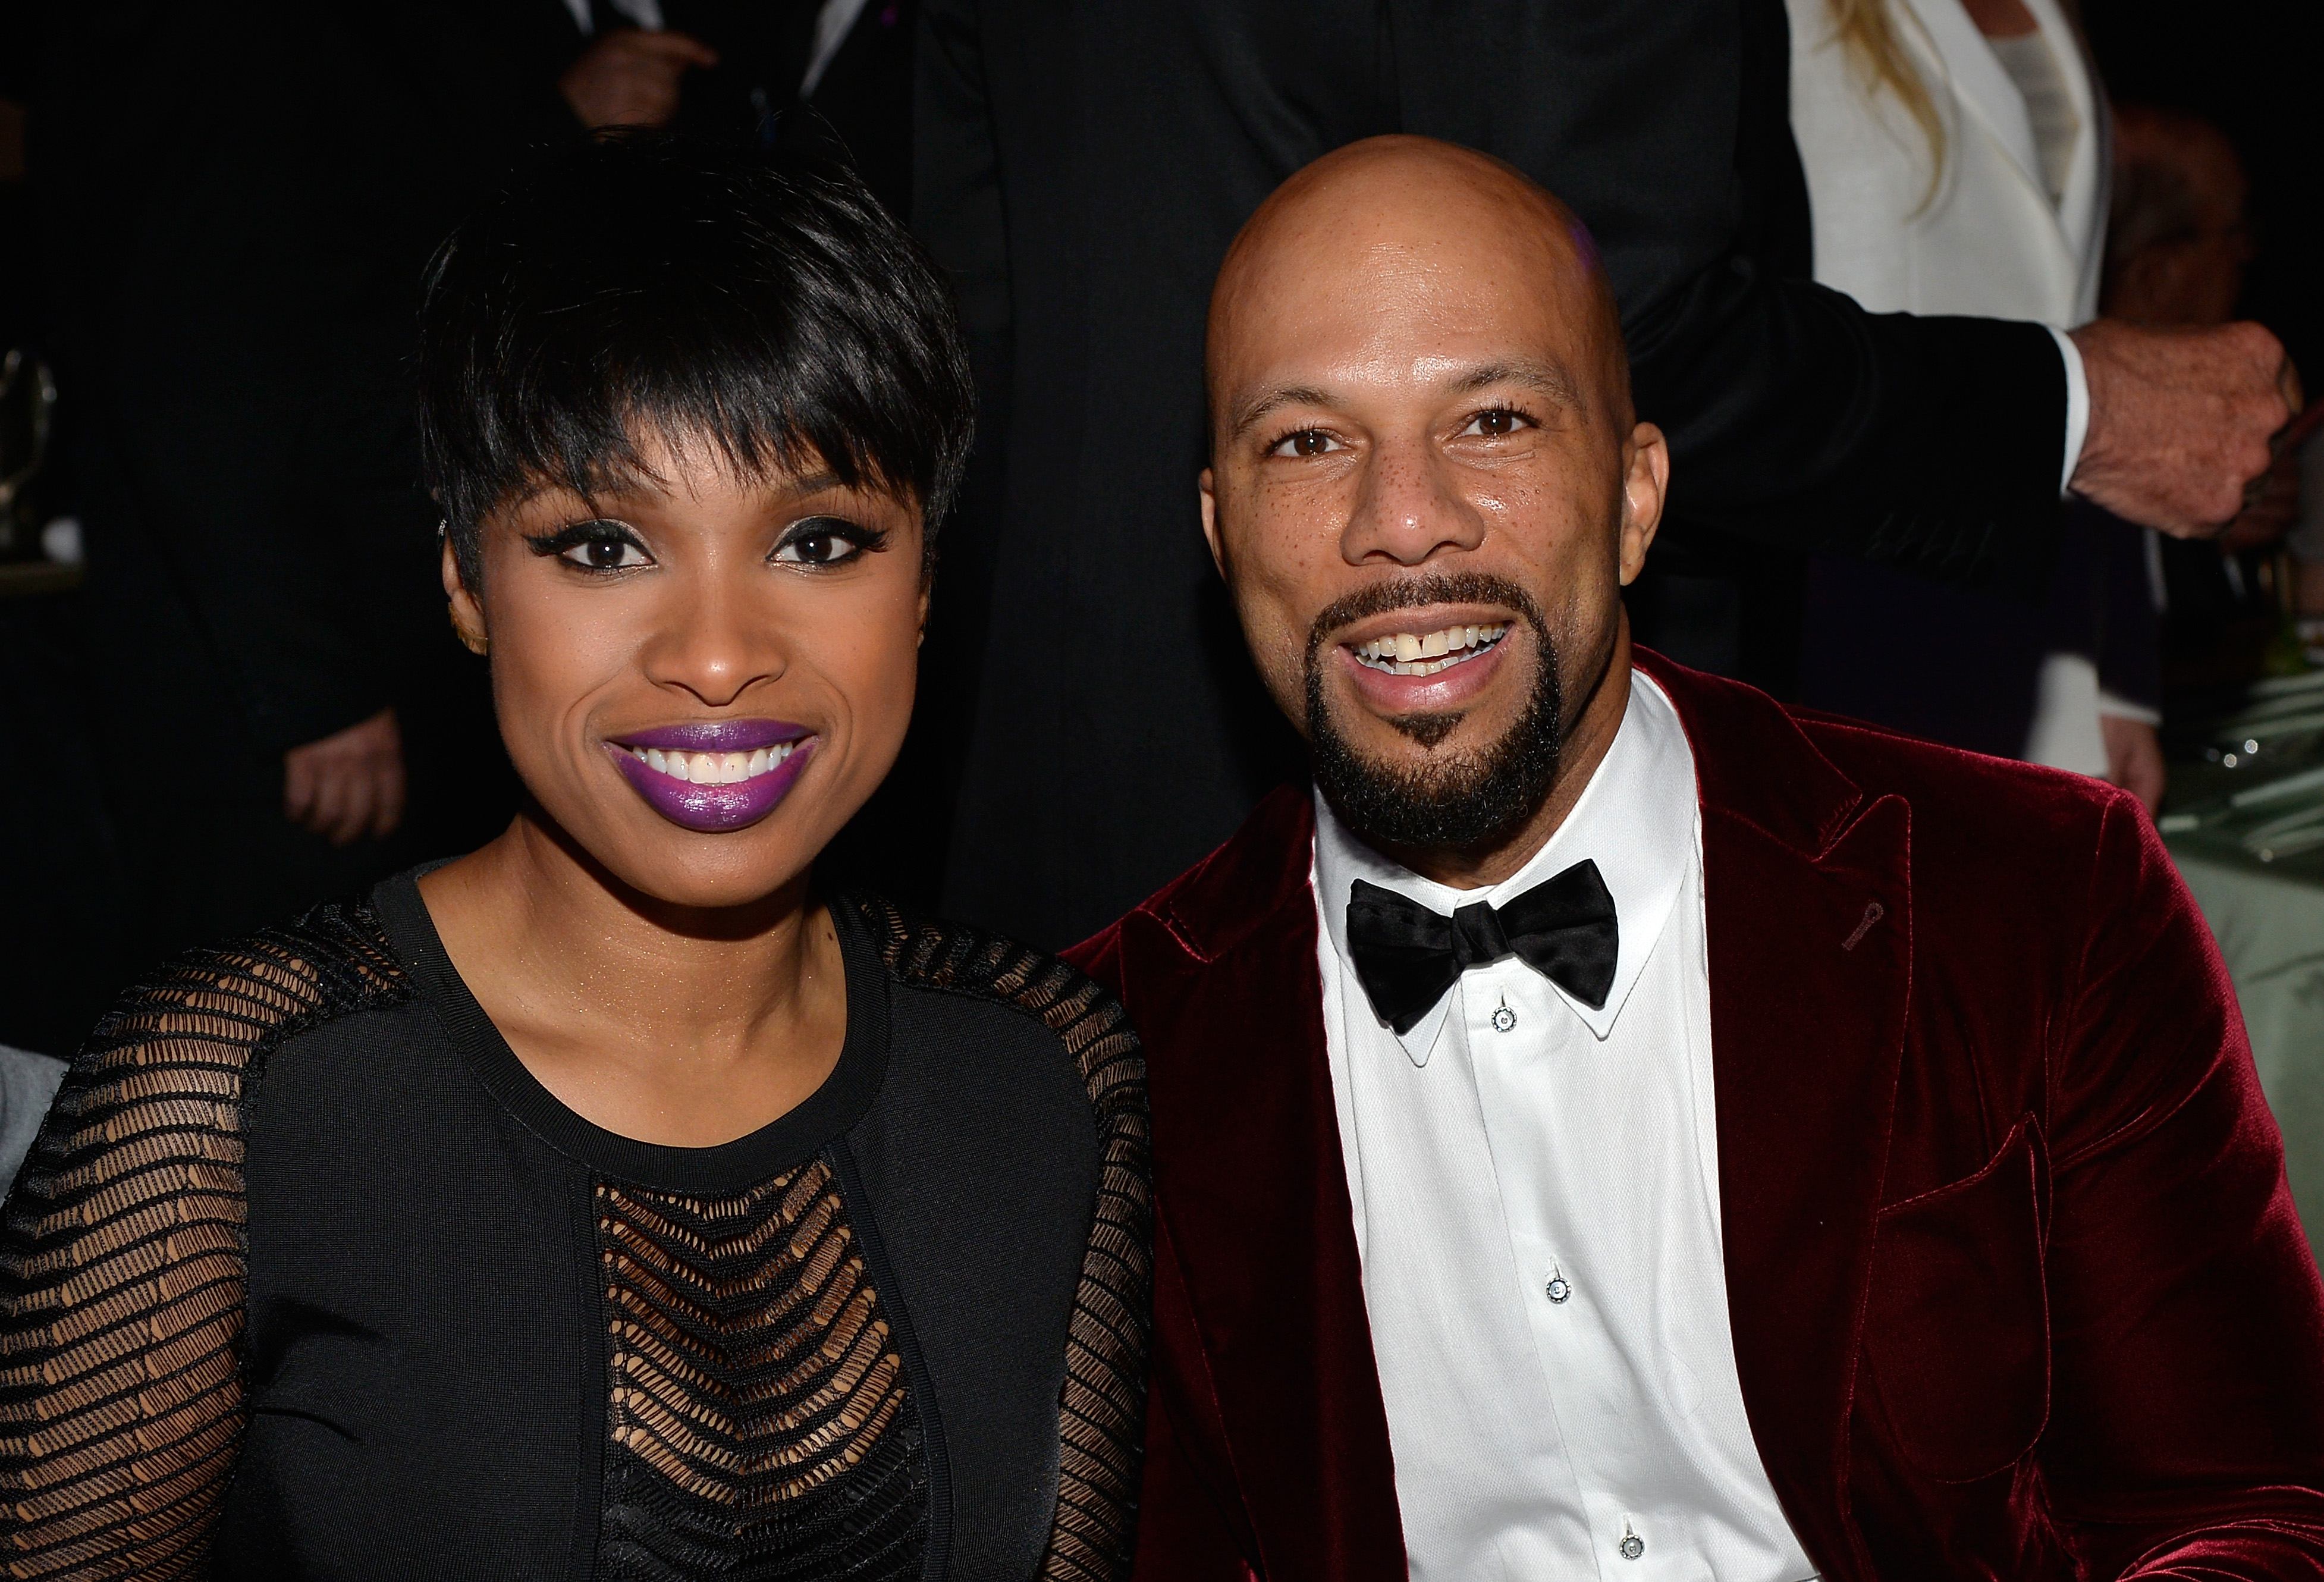 Jennifer Hudson and Common at The Beverly Hilton Hotel on February 7, 2015 in Los Angeles, California. | Source: Getty Images